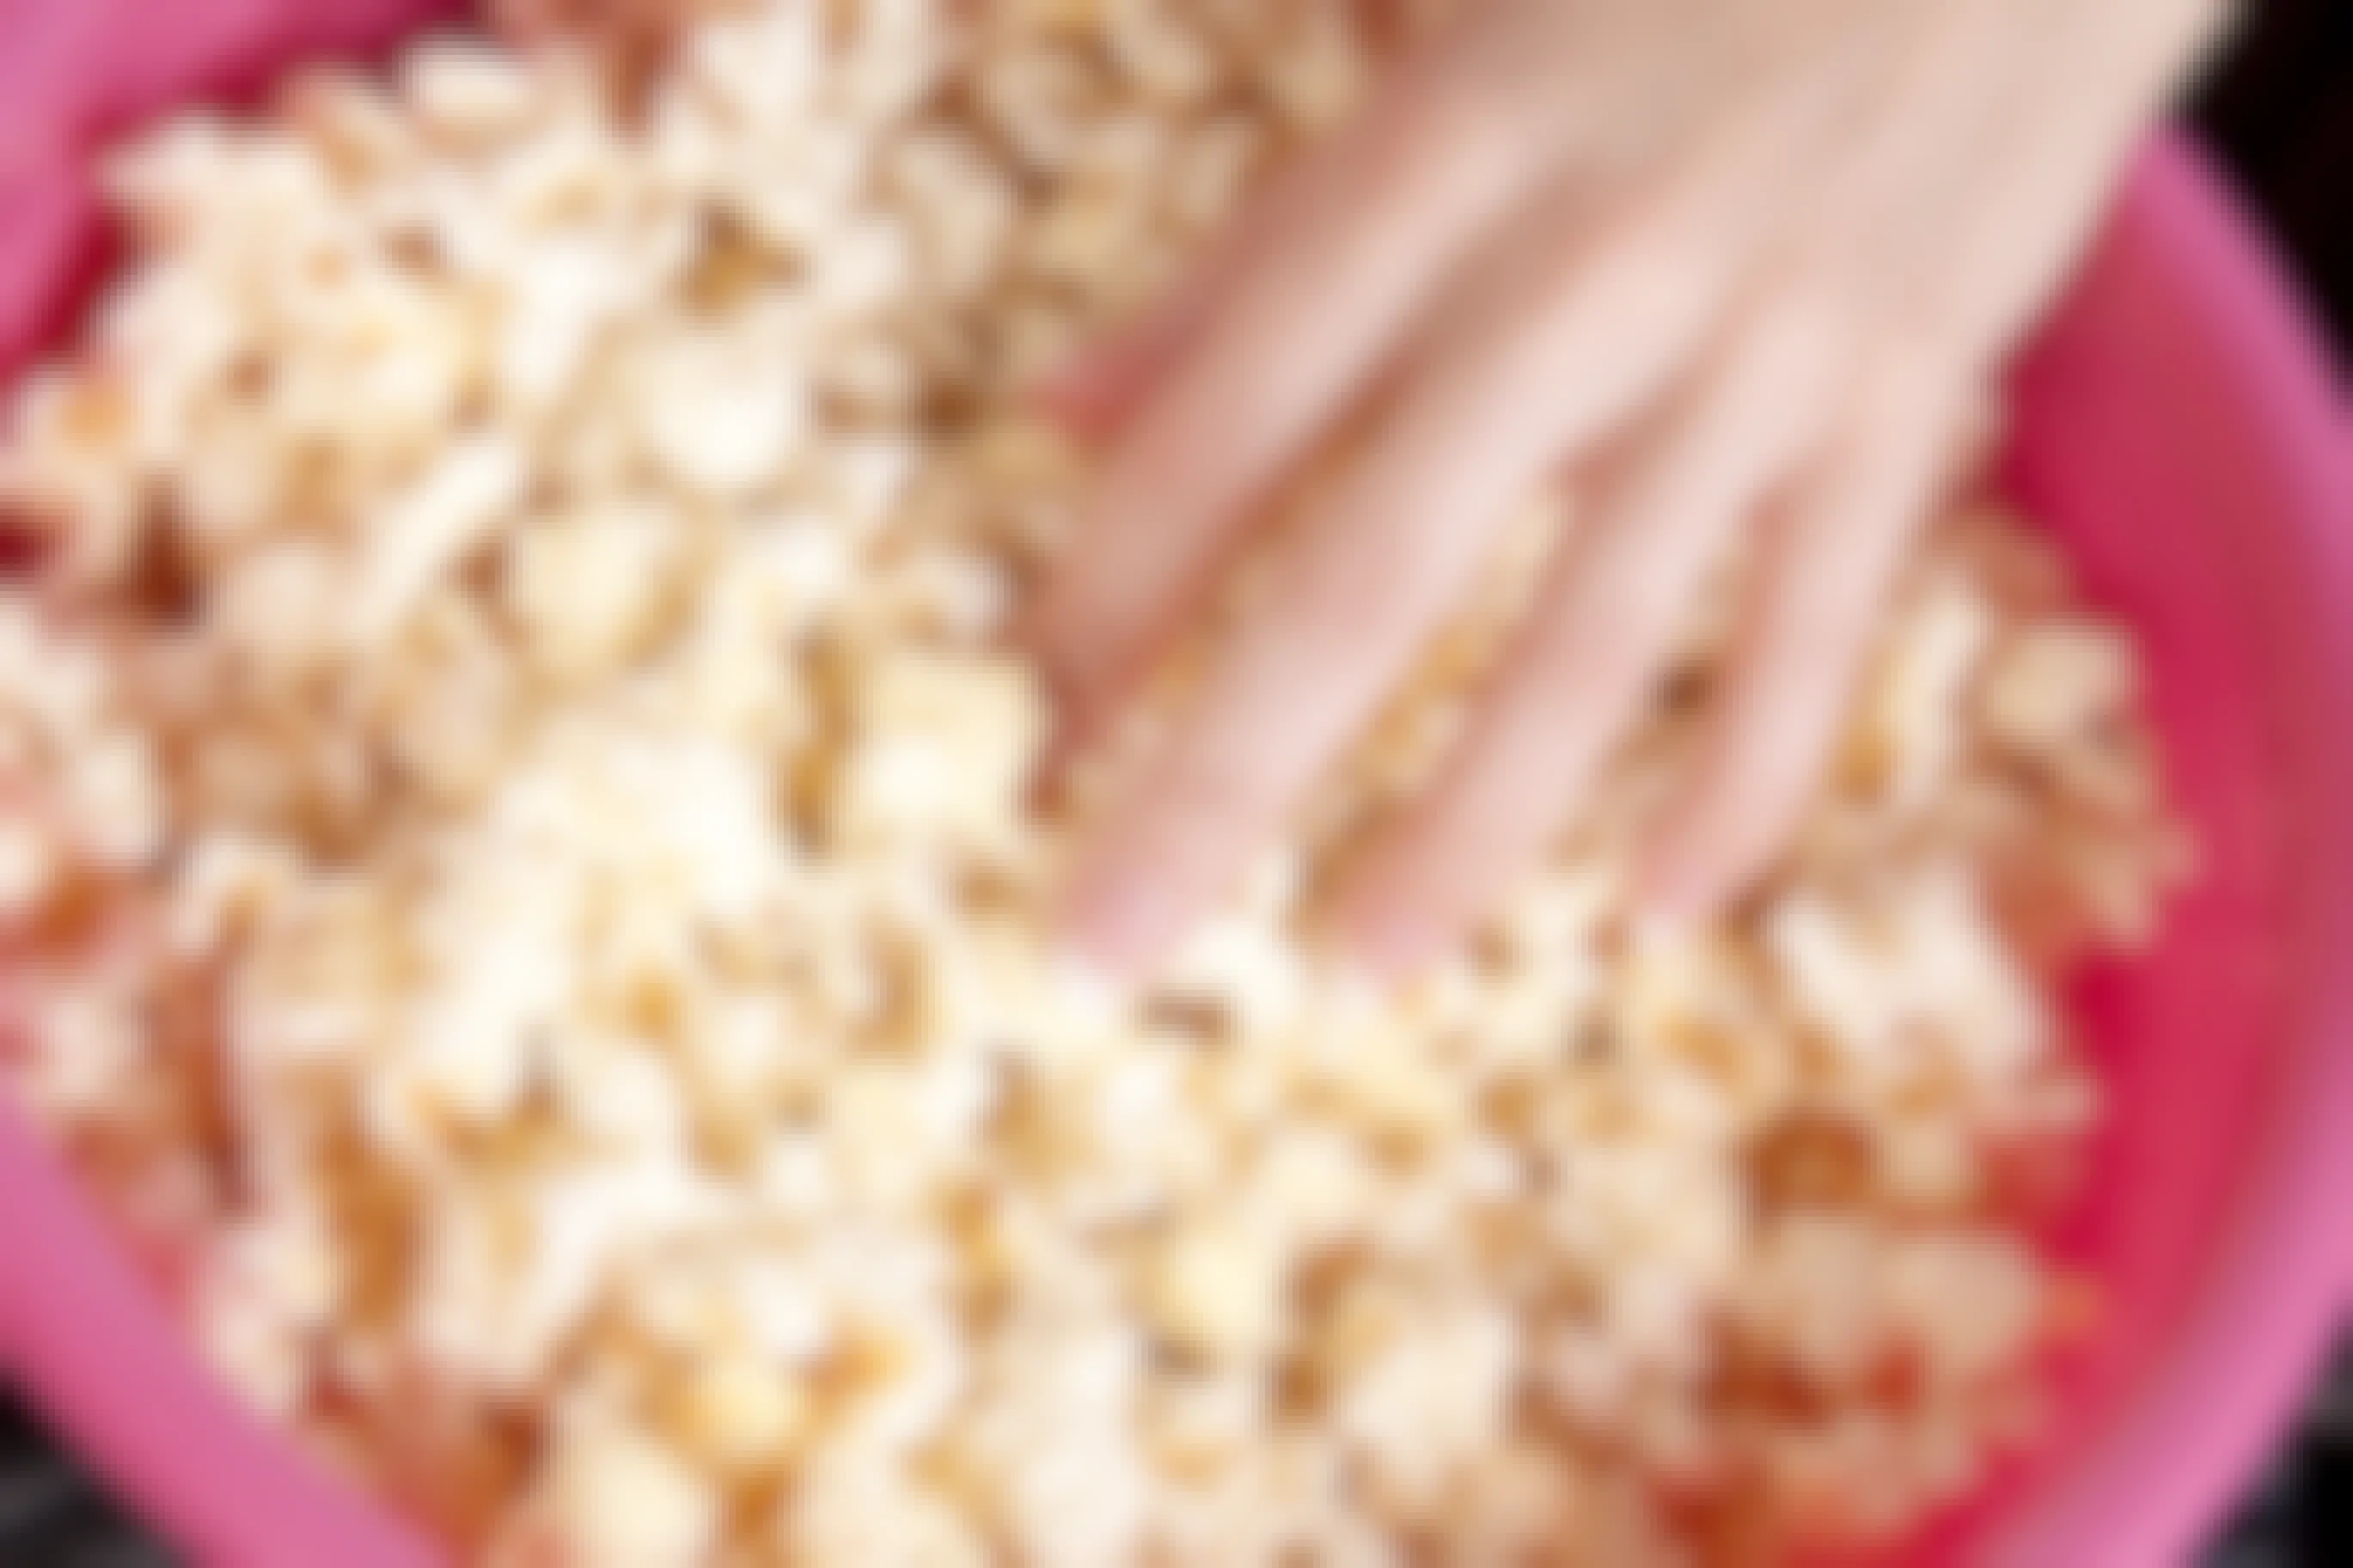 National Popcorn Day Is Jan. 19 — Here's What Deals Are Poppin'